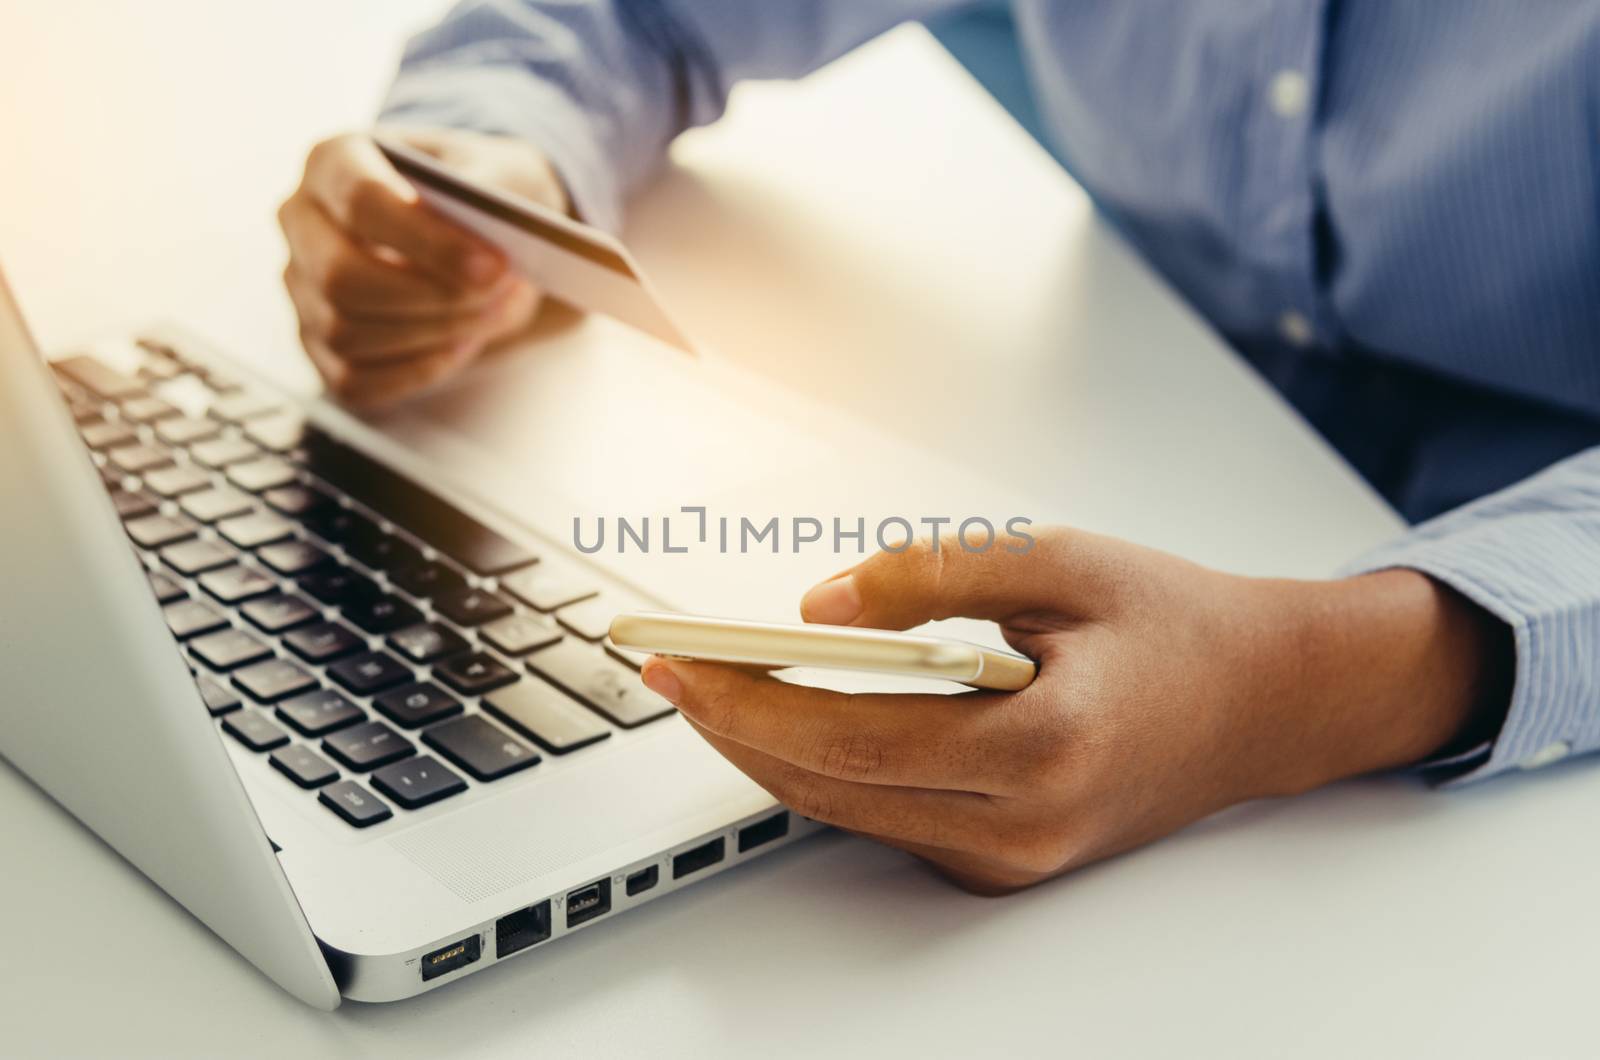 Hand holding credit cards and using laptops purchased order and payment with technology